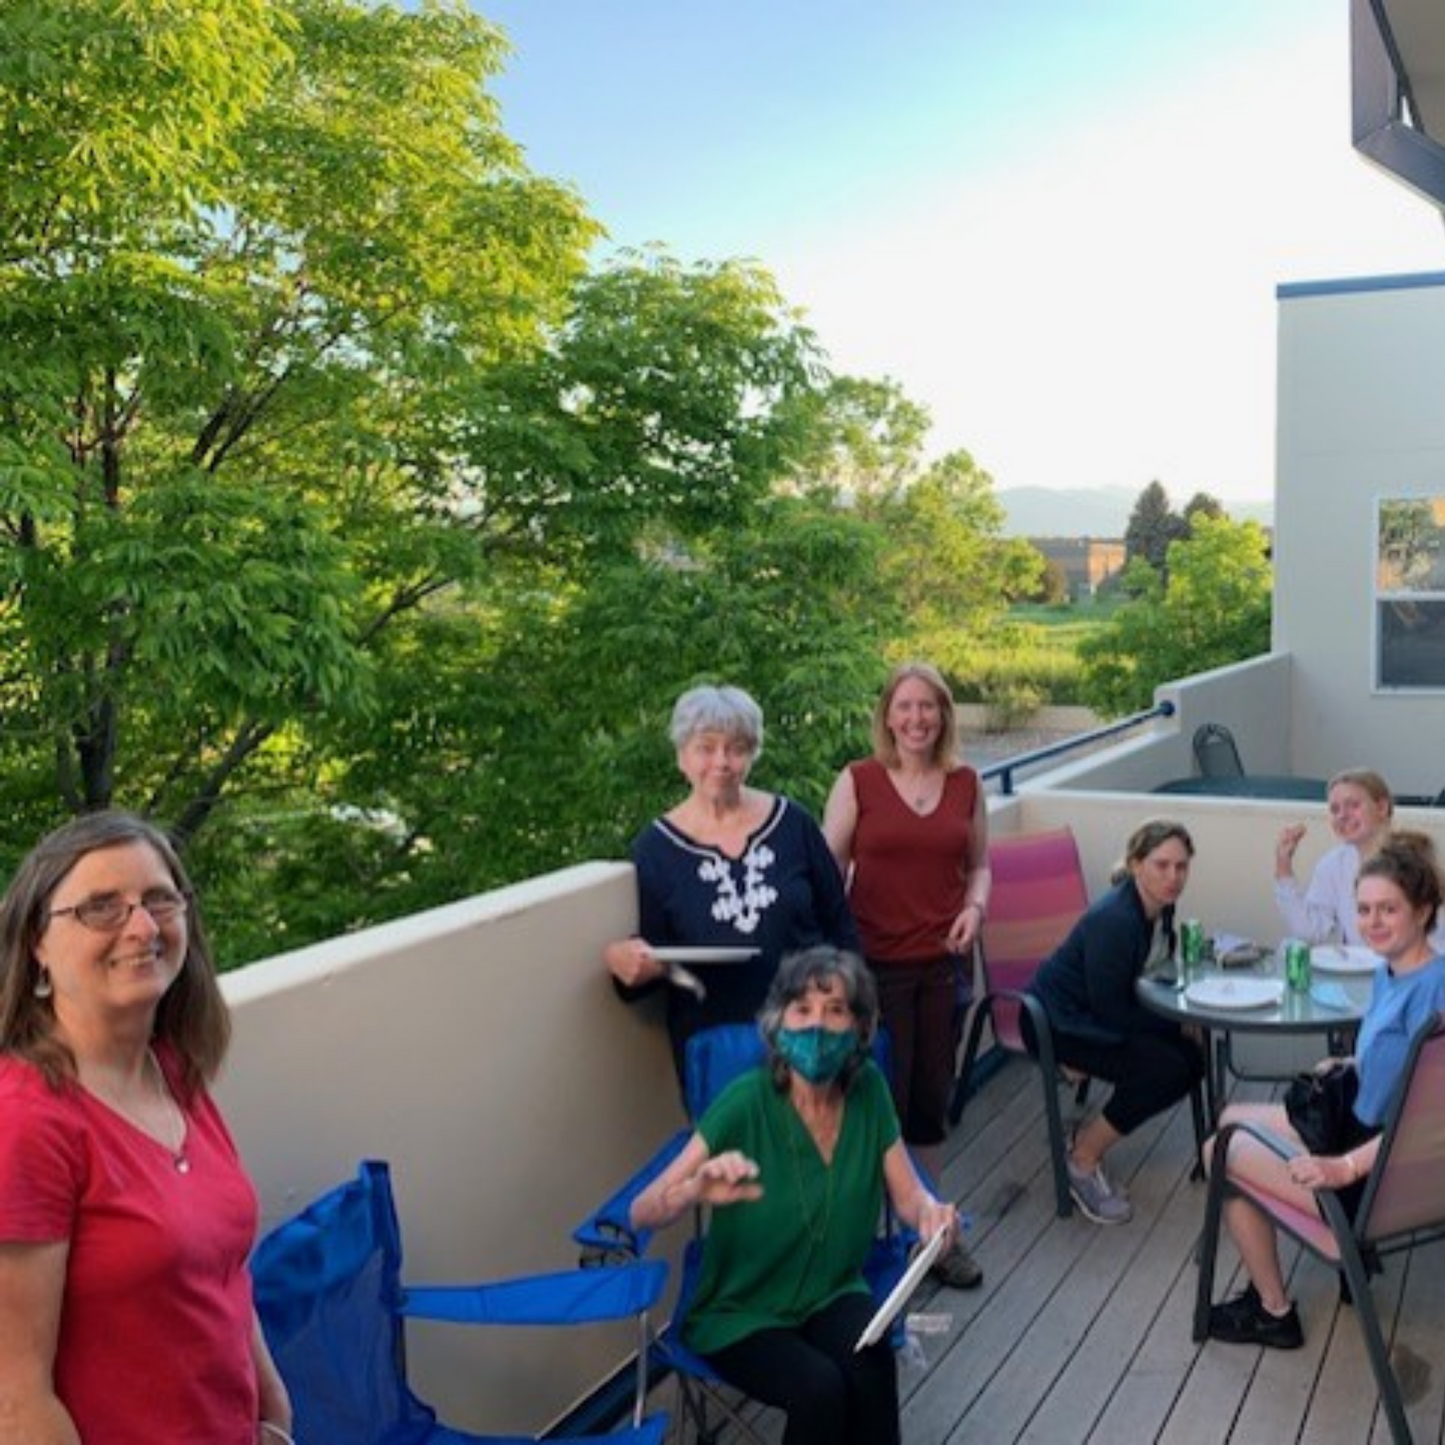 Ladies' Night Out on the deck